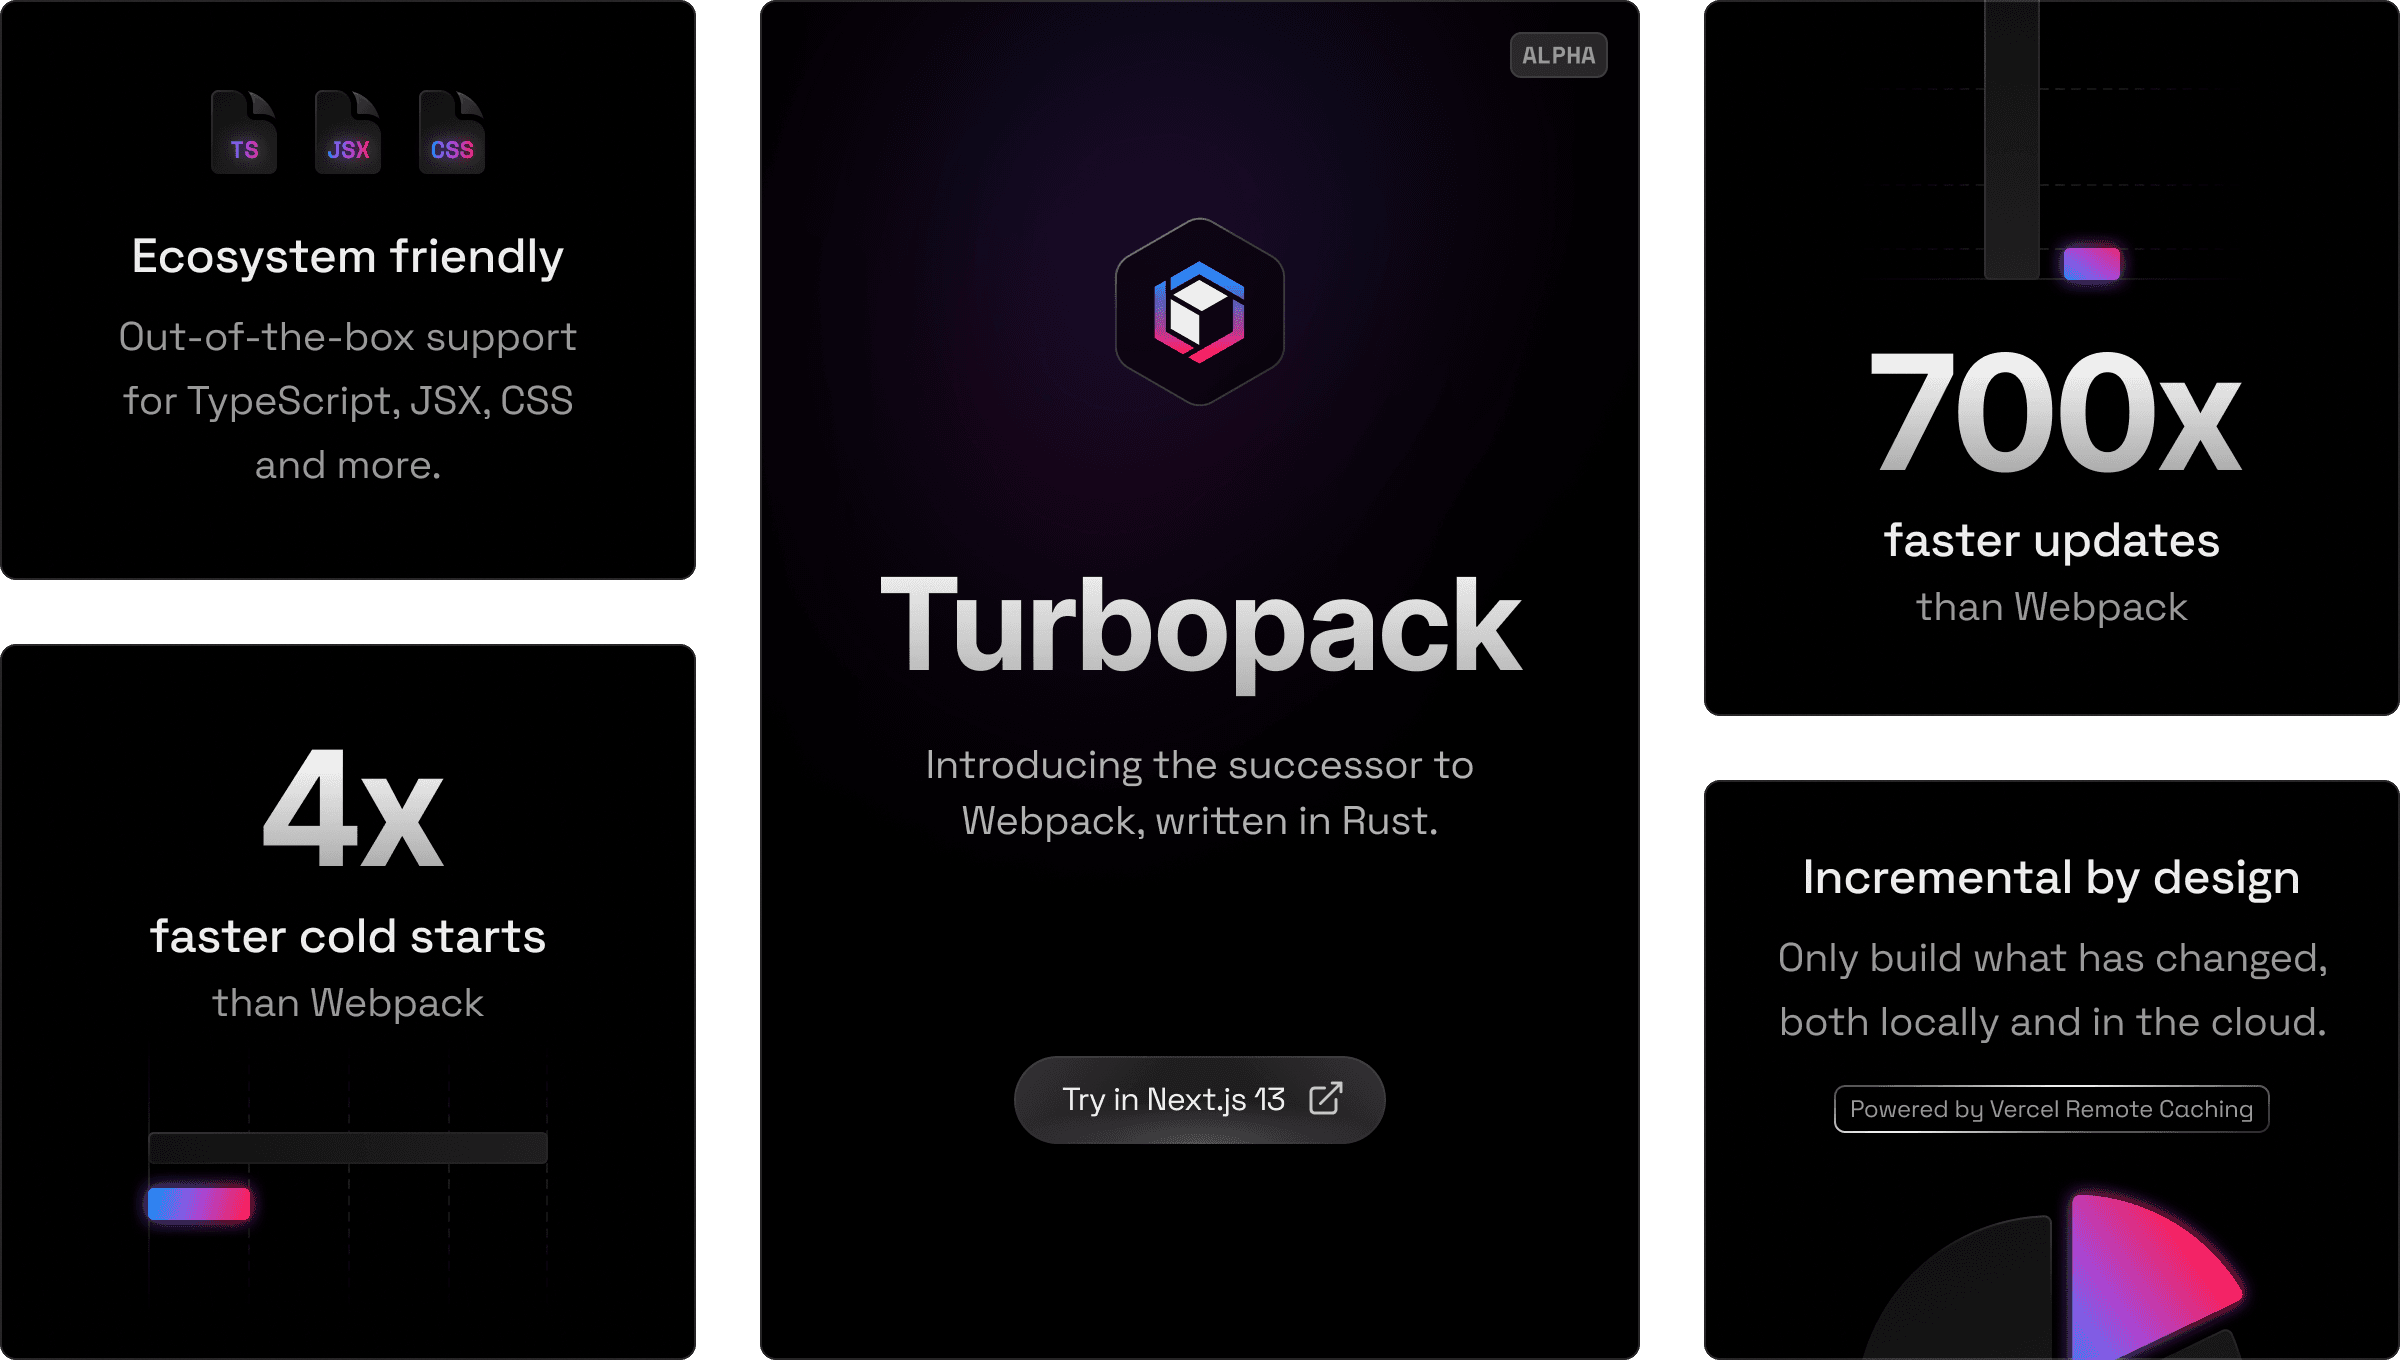 Turbopack provides a fast and flexible development experience for apps of any size.